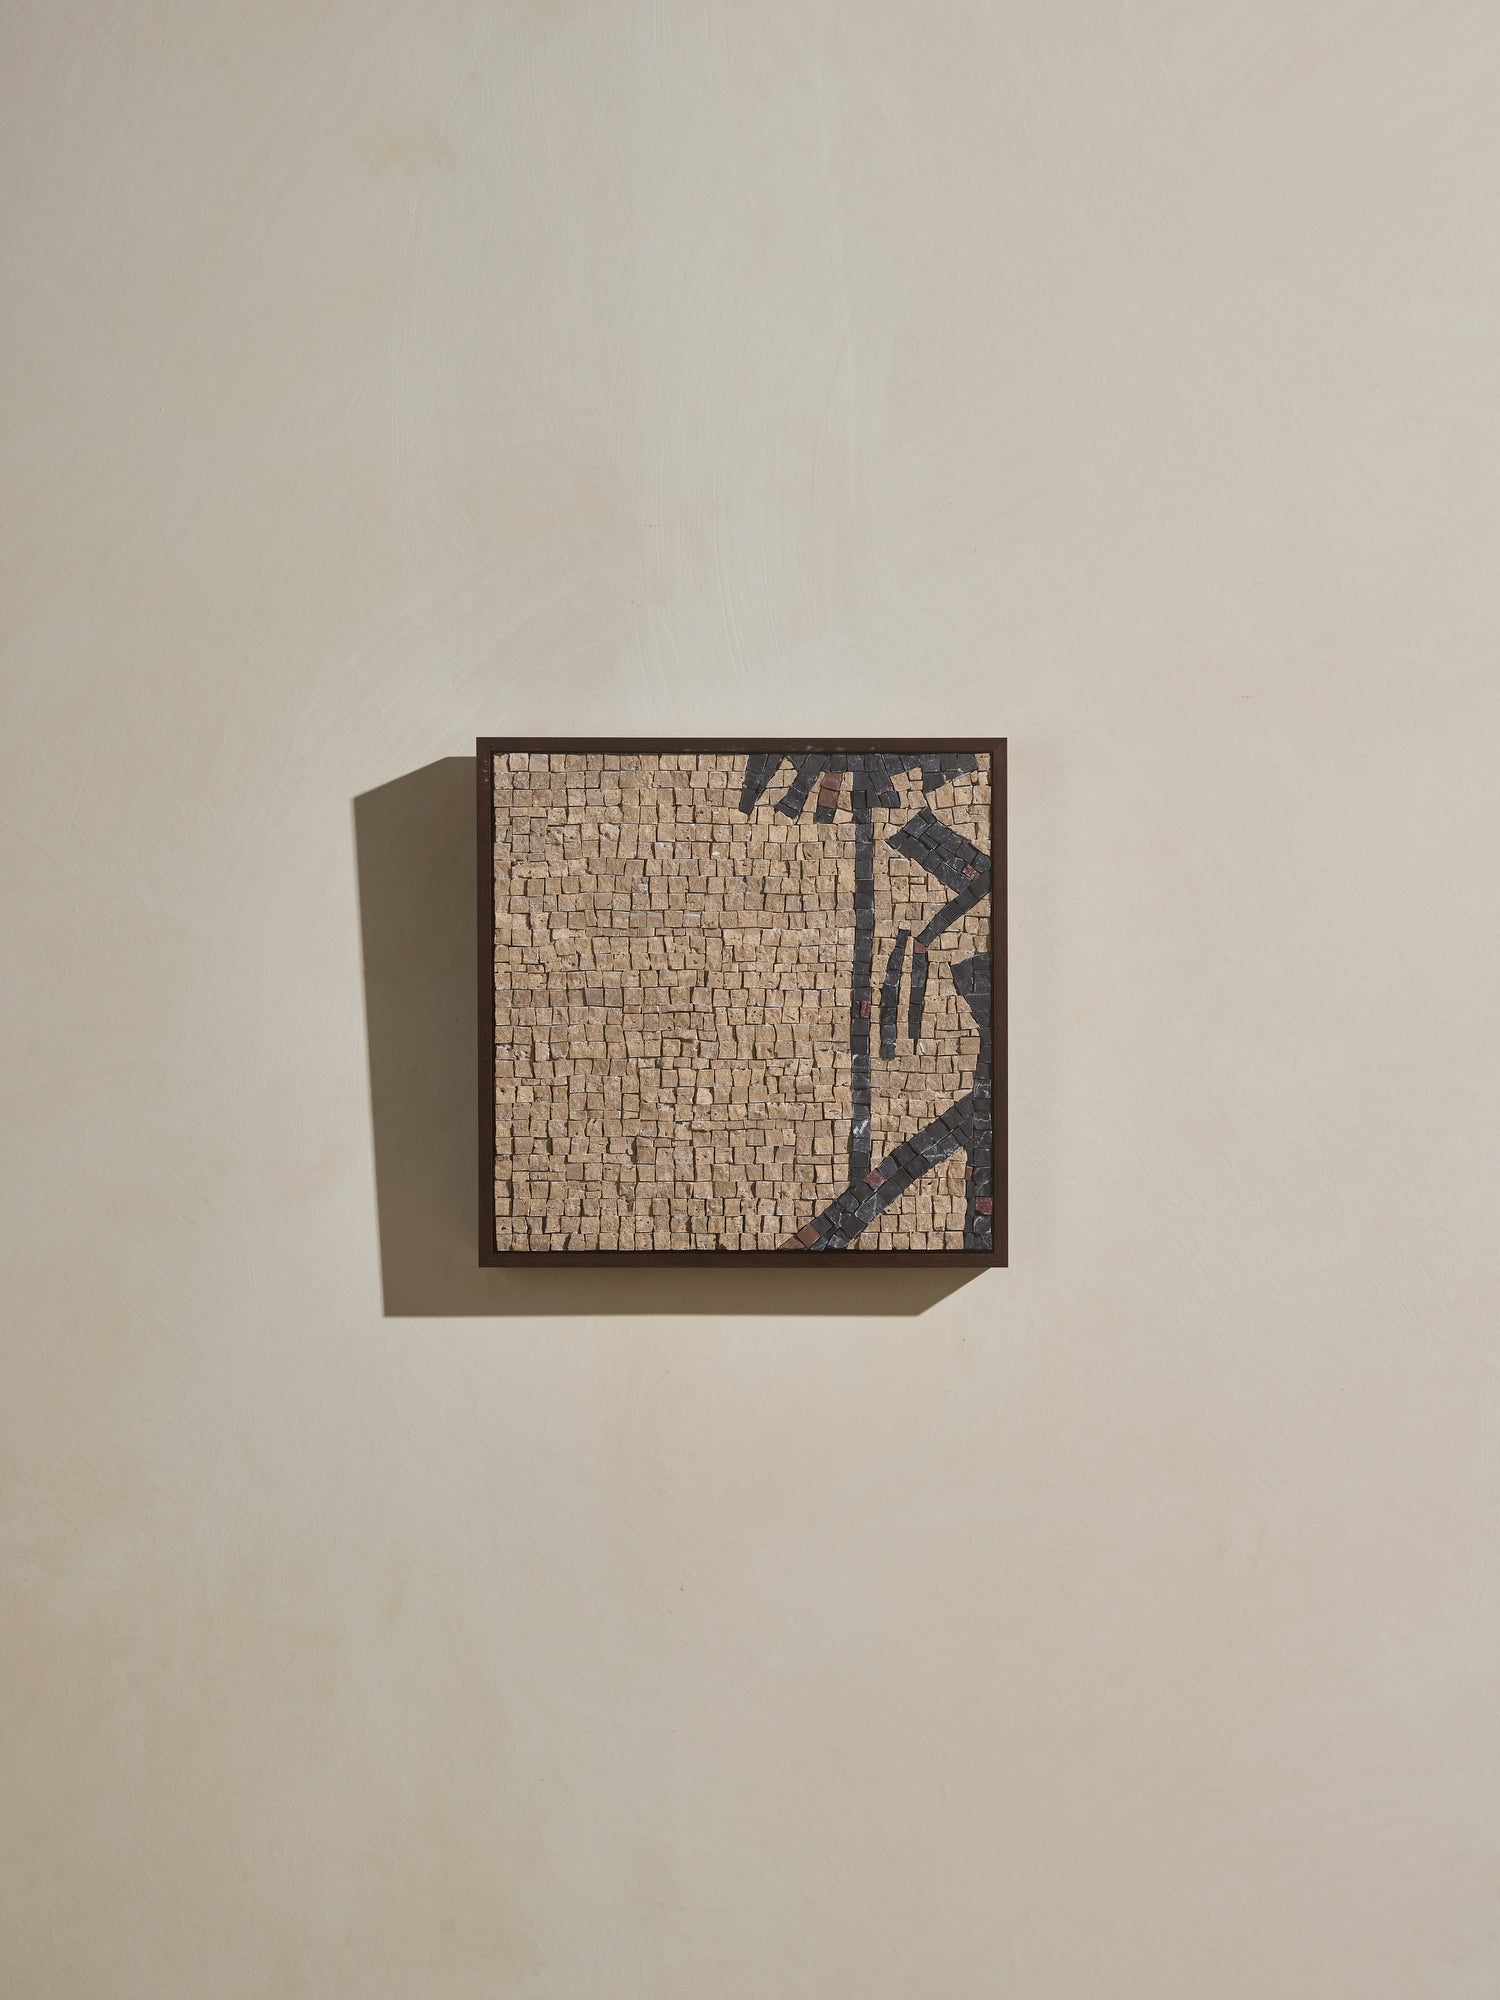 Mosaic square stone art piece with beige and black details and wooden framing.